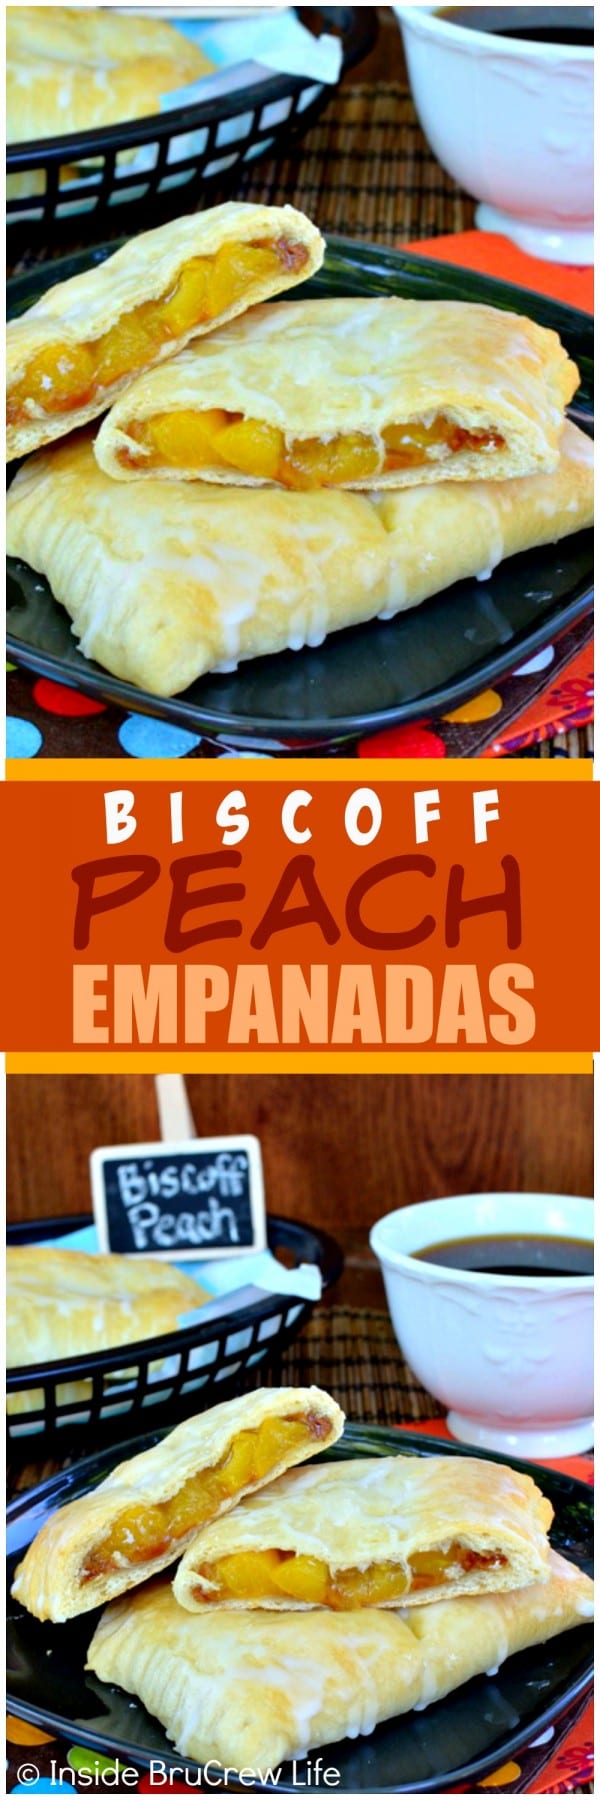 Biscoff Peach Empanadas - easy little pies filled with cookie butter and peach pie filling! Awesome dessert recipe!